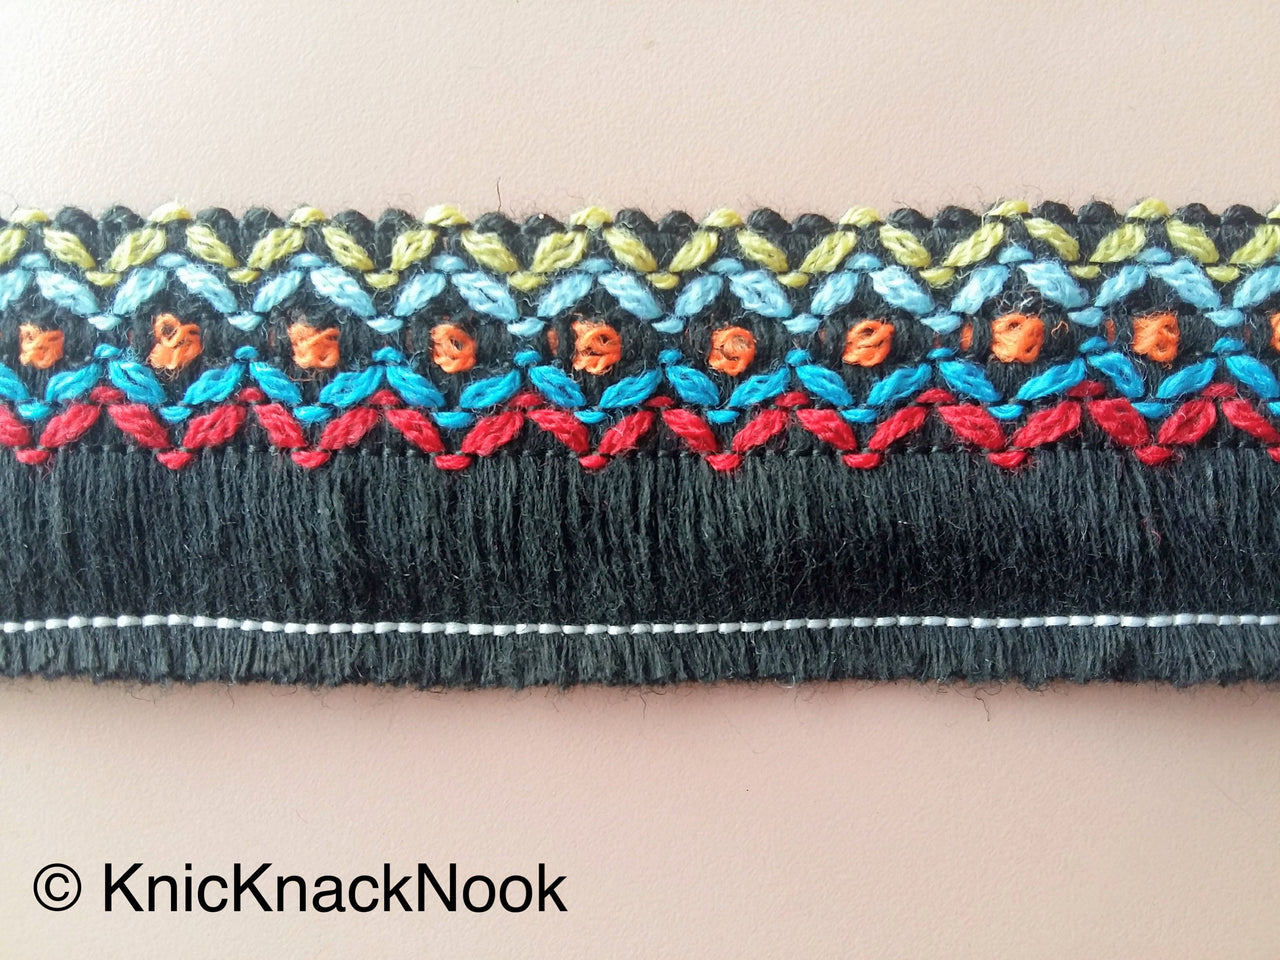 White / Black Threaded Trim With Red, Blue, Yellow And Orange Embroidery, Approx. 38mm Wide - 200317L100/01Trim